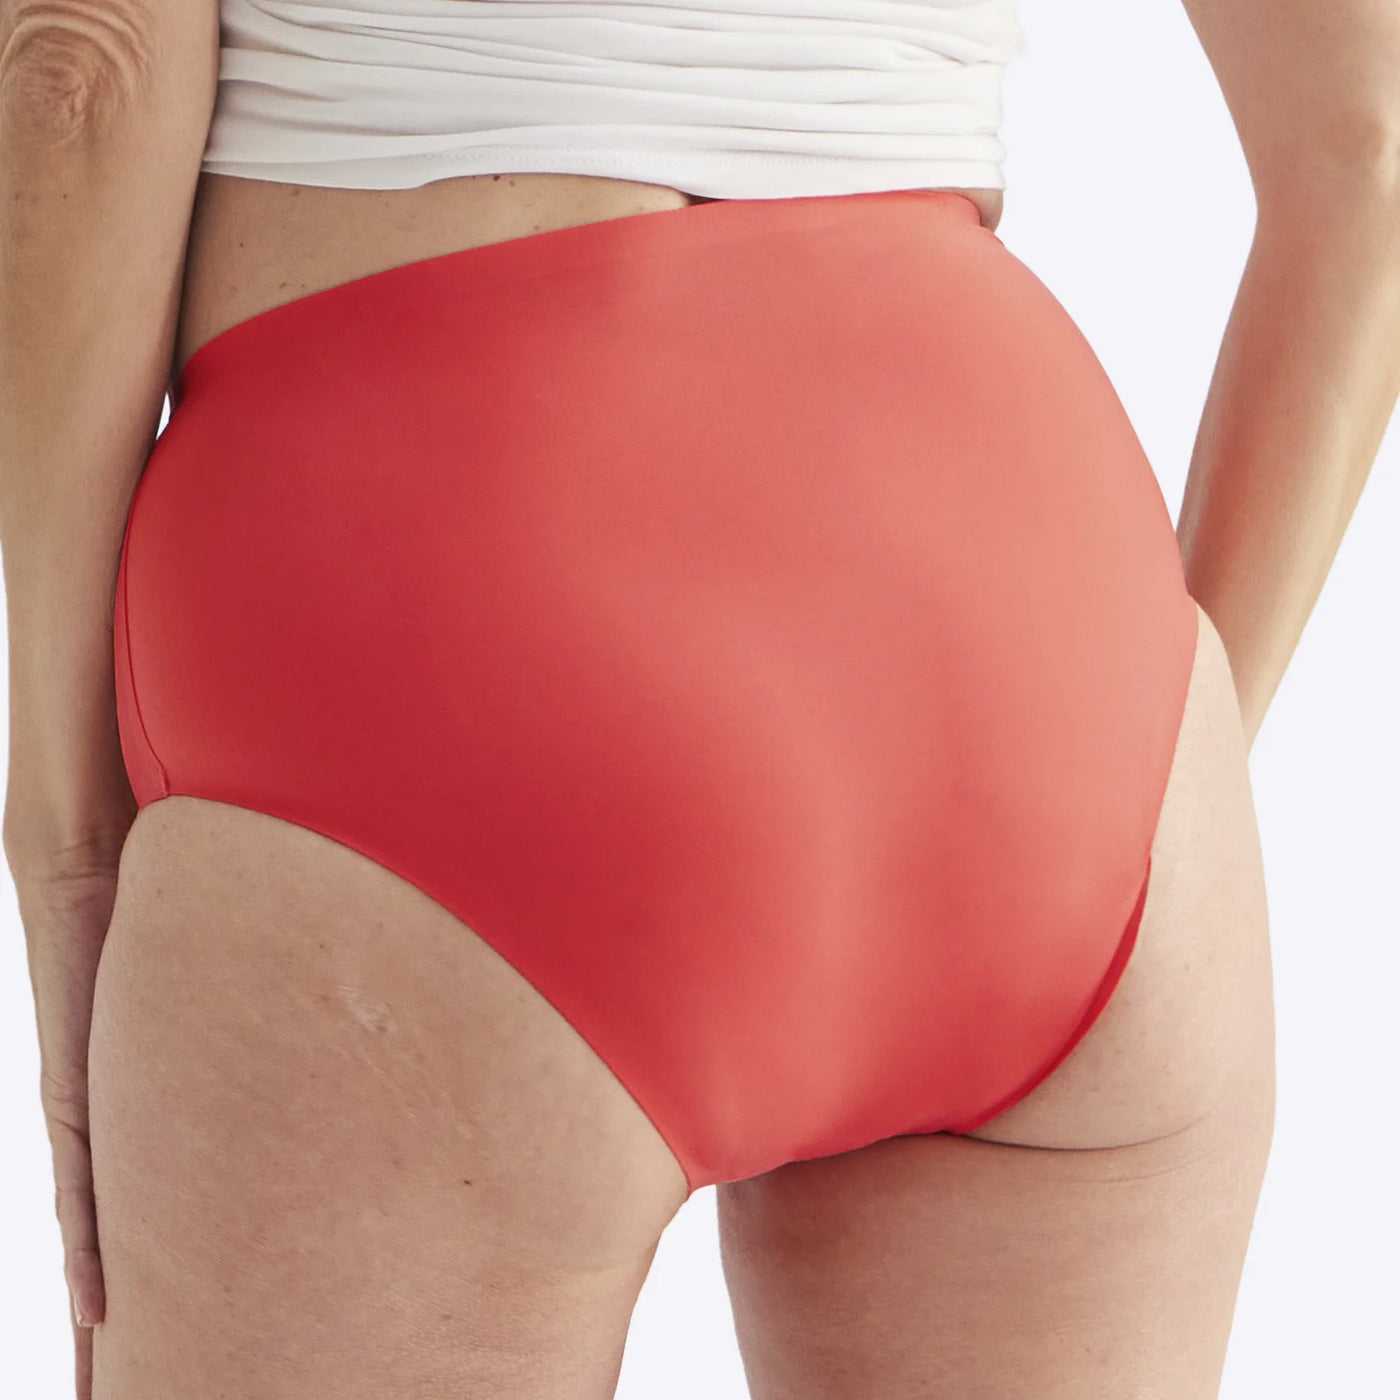 WUKA Drytech Midi Brief Incontinence Pants Style Coral Pink Colour Back